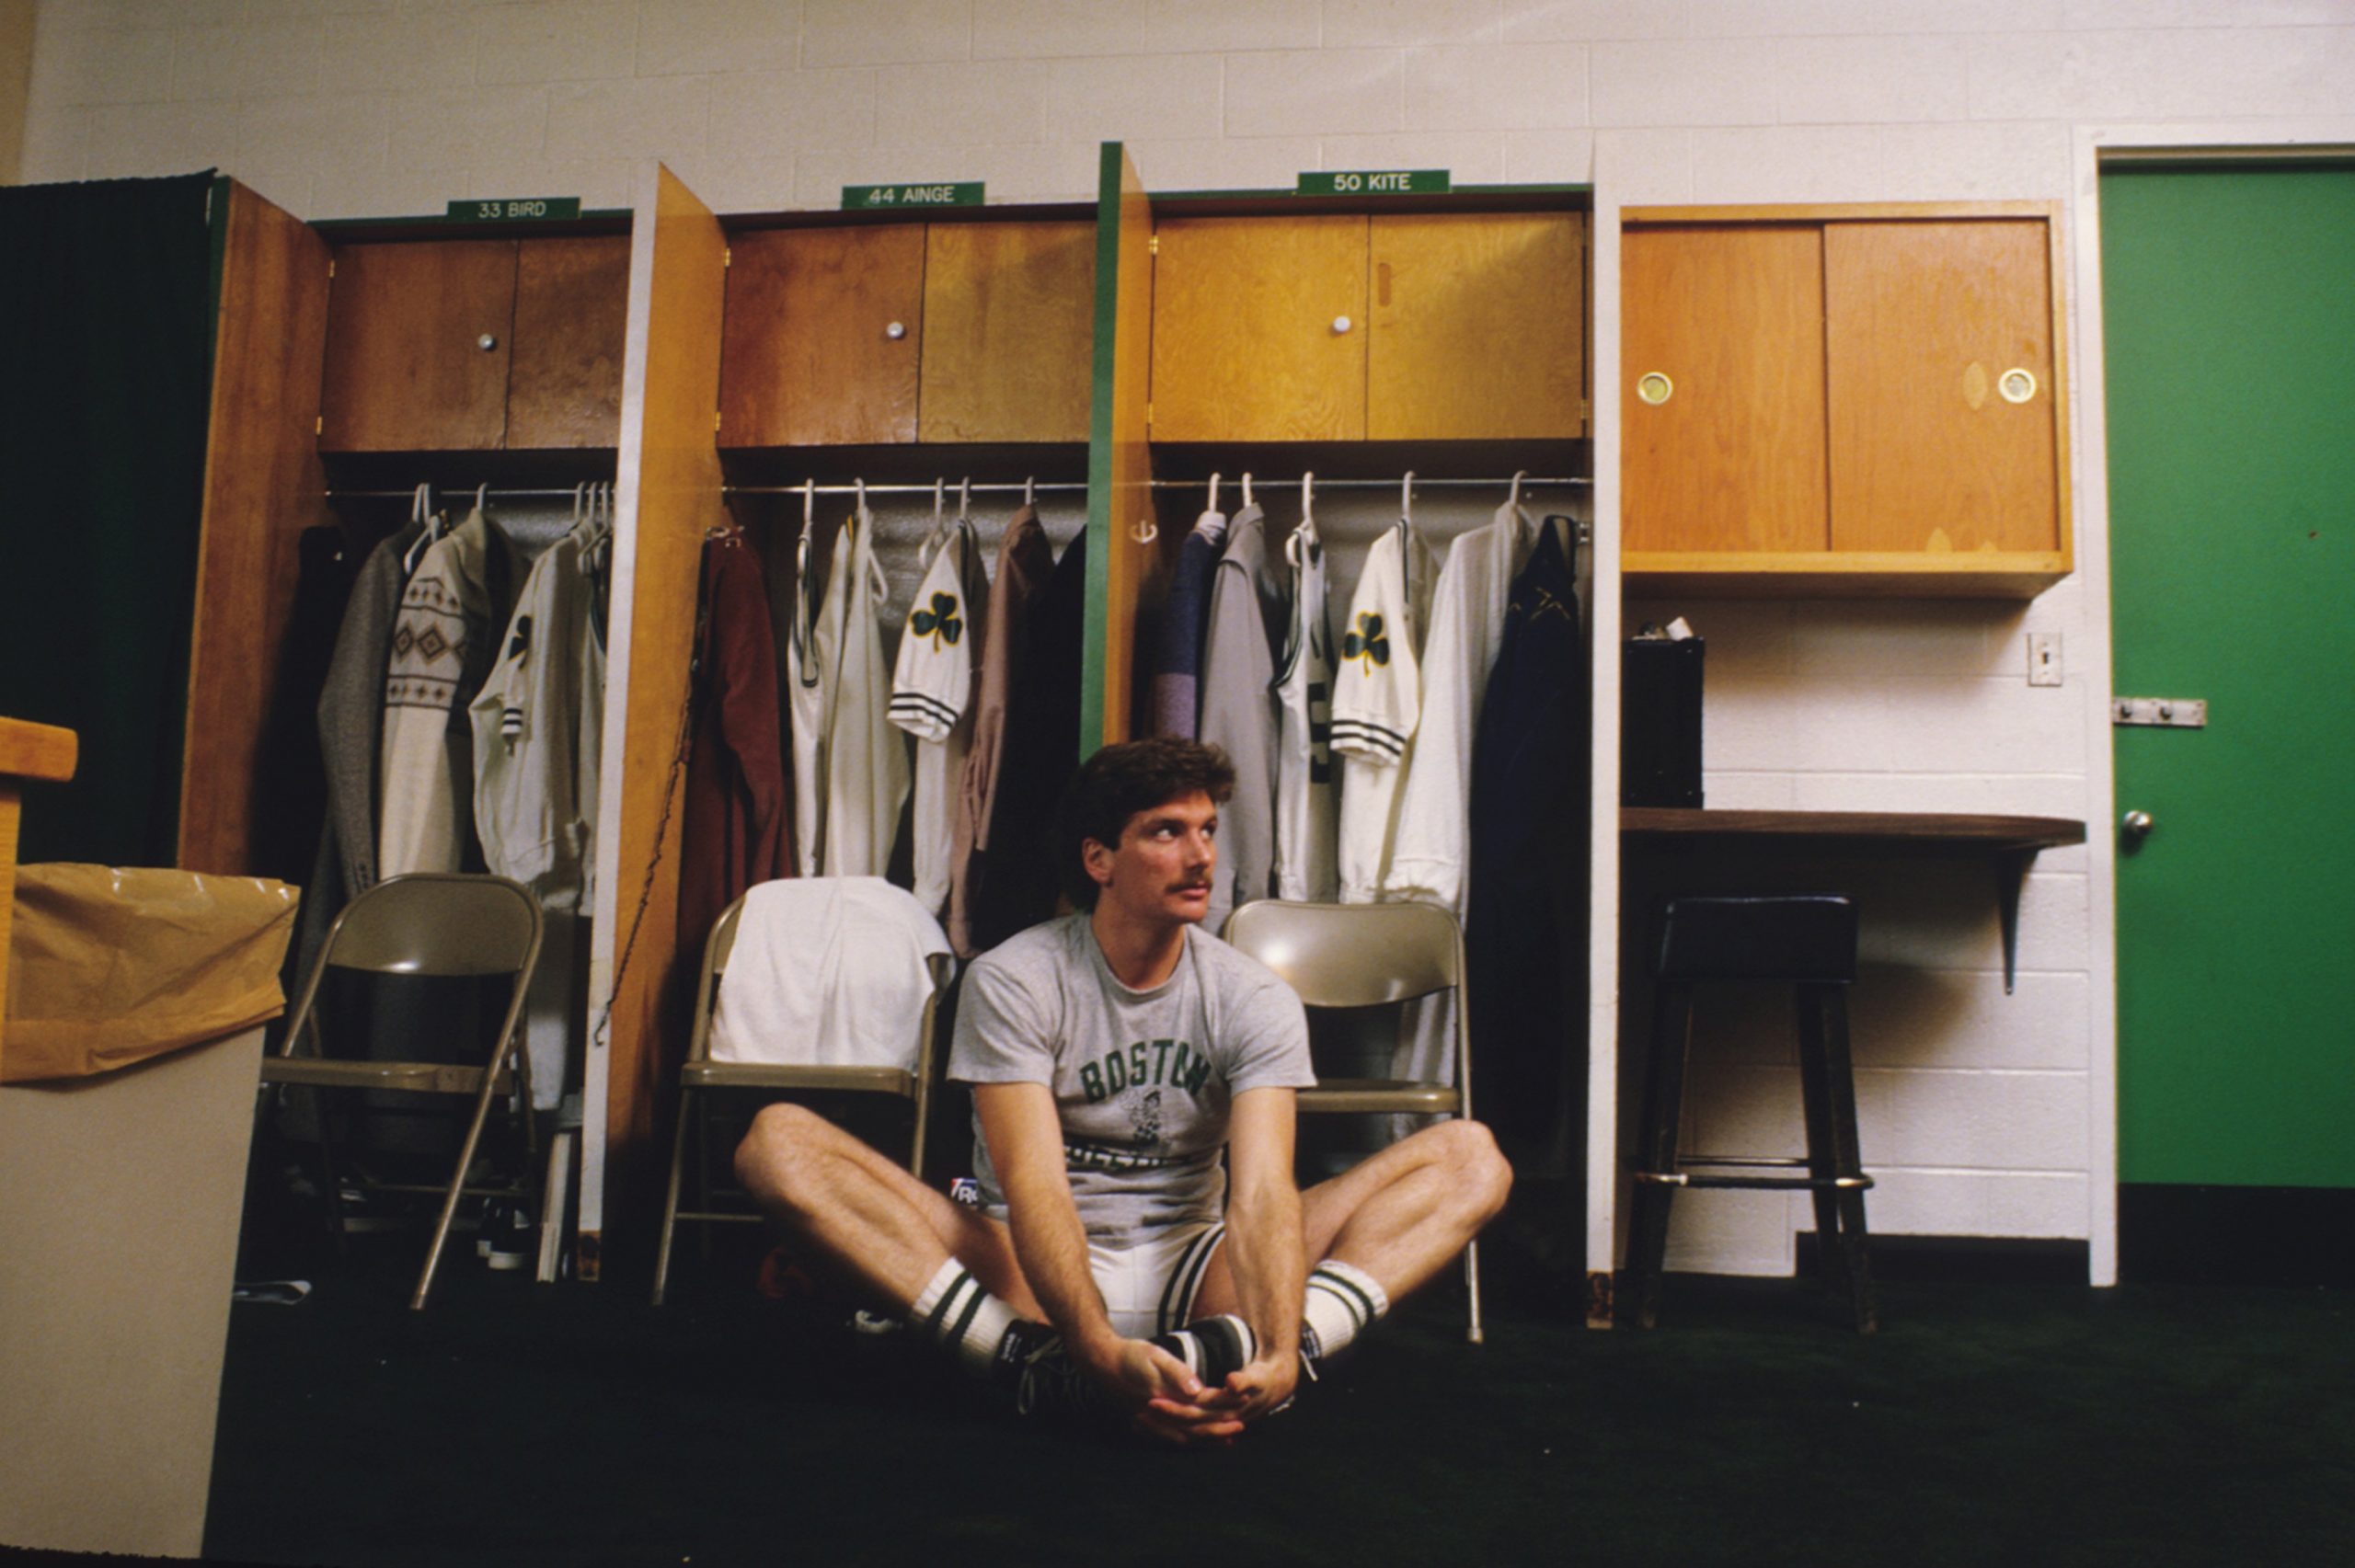 Greg Kite of the Boston Celtics in the locker room before a game on January 22, 1986.